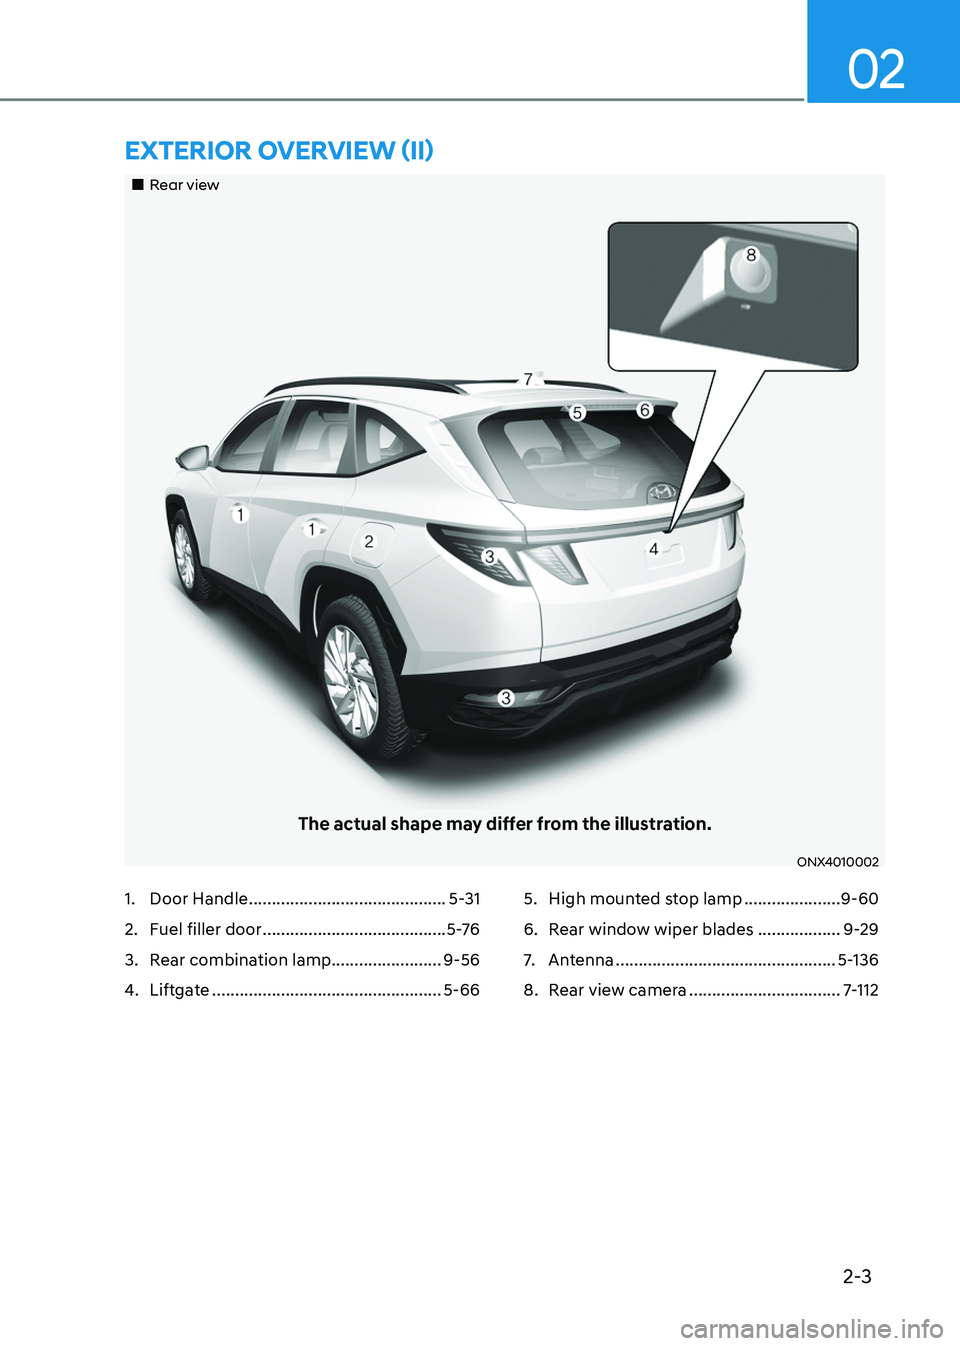 HYUNDAI TUCSON 2022  Owners Manual 2-3
02
„„Rear view
The actual shape may differ from the illustration.
ONX4010002
EXTERIOR OVERVIEW (II)
1. Door Handle ...........................................5-31
2. Fuel filler door ...